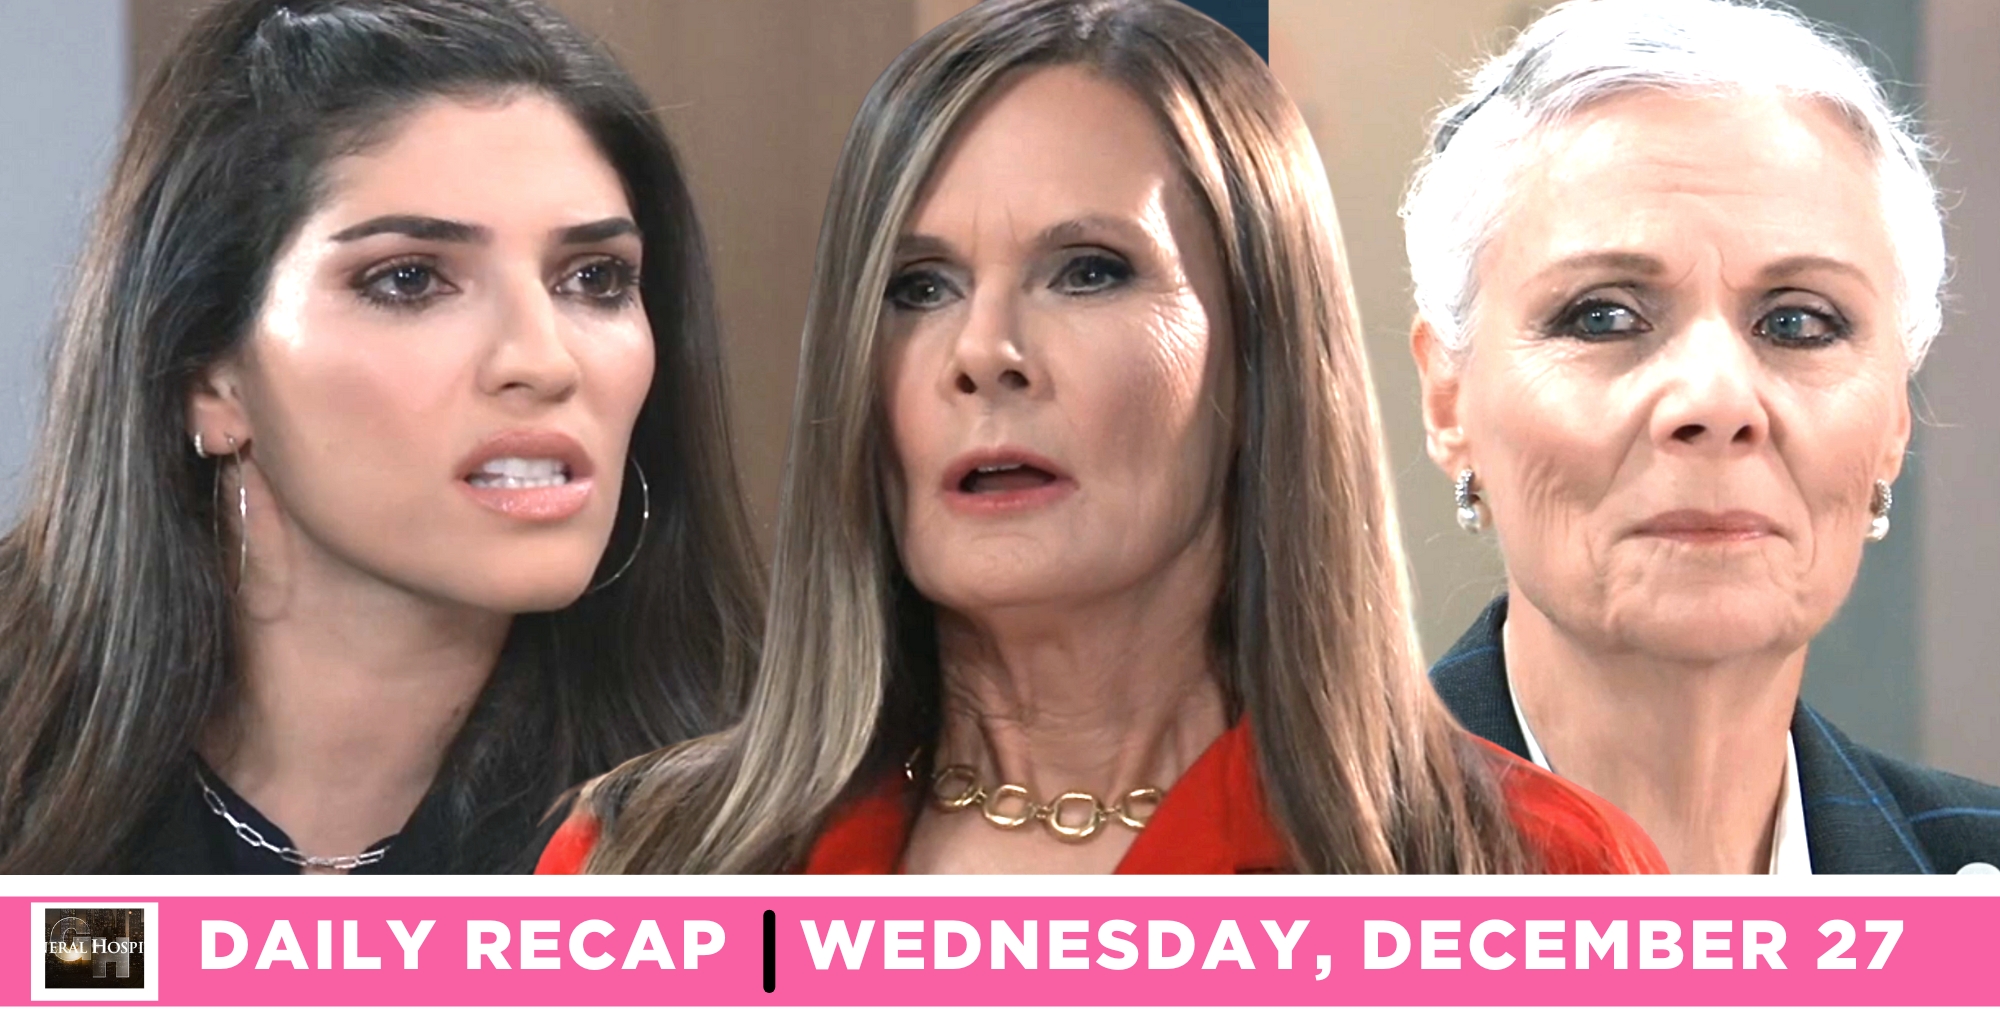 brook lynn quartermaine tore into lucy toe when she overheard her insulting tracy quatermaine on general hospital recap for wednesday, december 27, 2023.